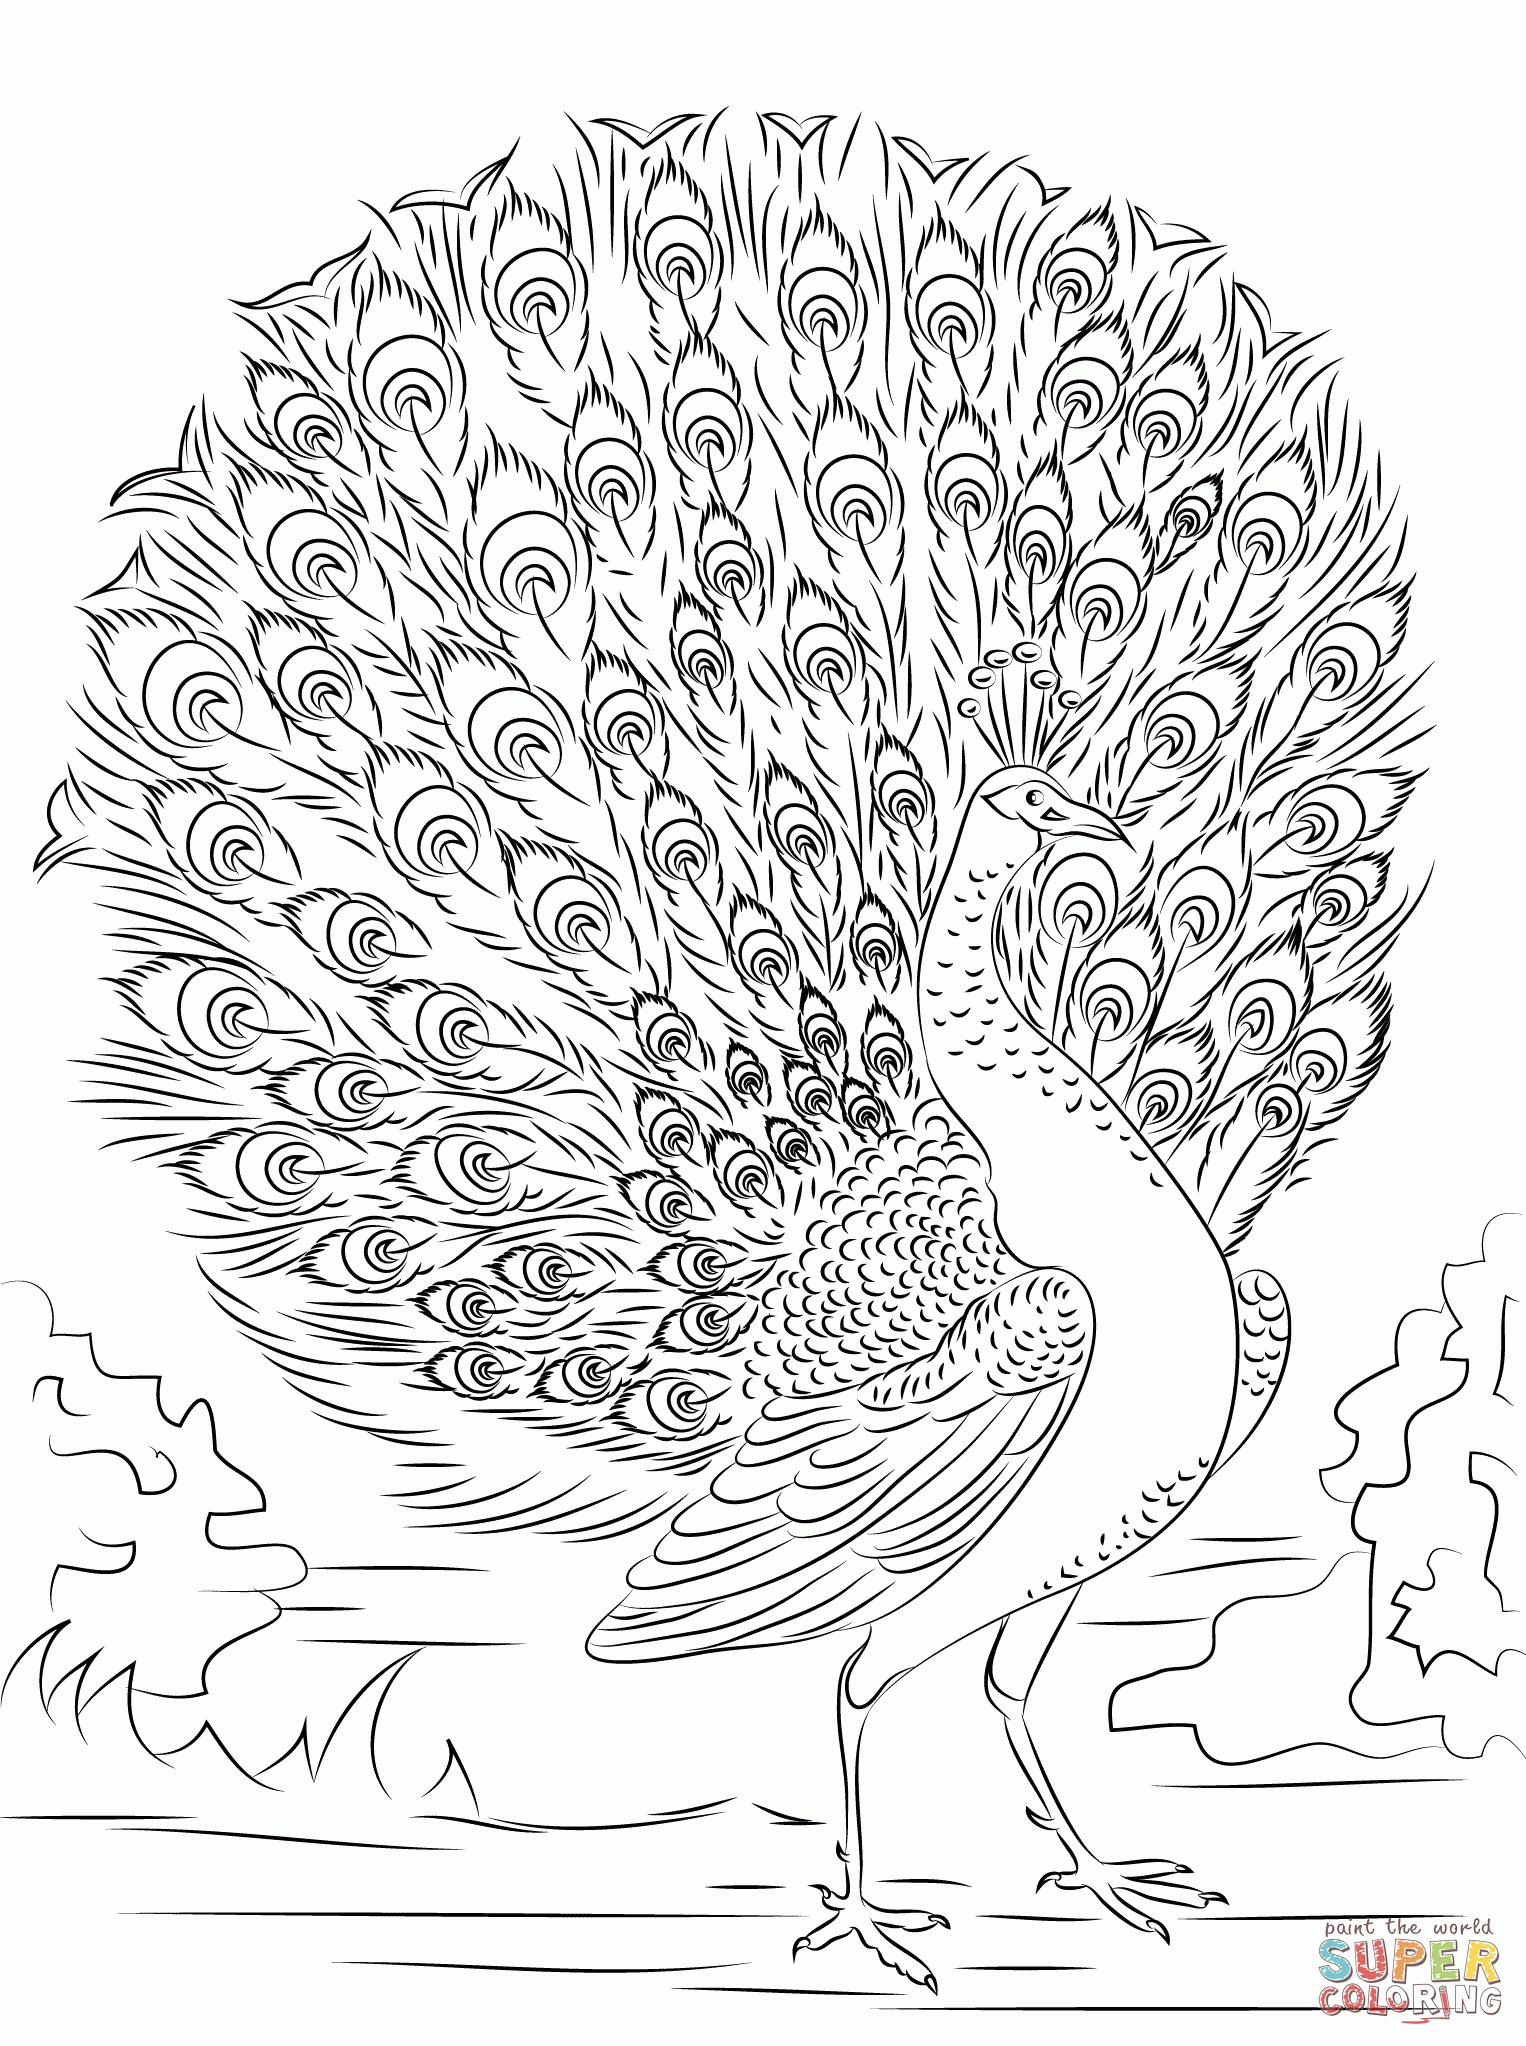 Related Peacock Coloring Pages item-11020, Peacock Coloring Pages ...